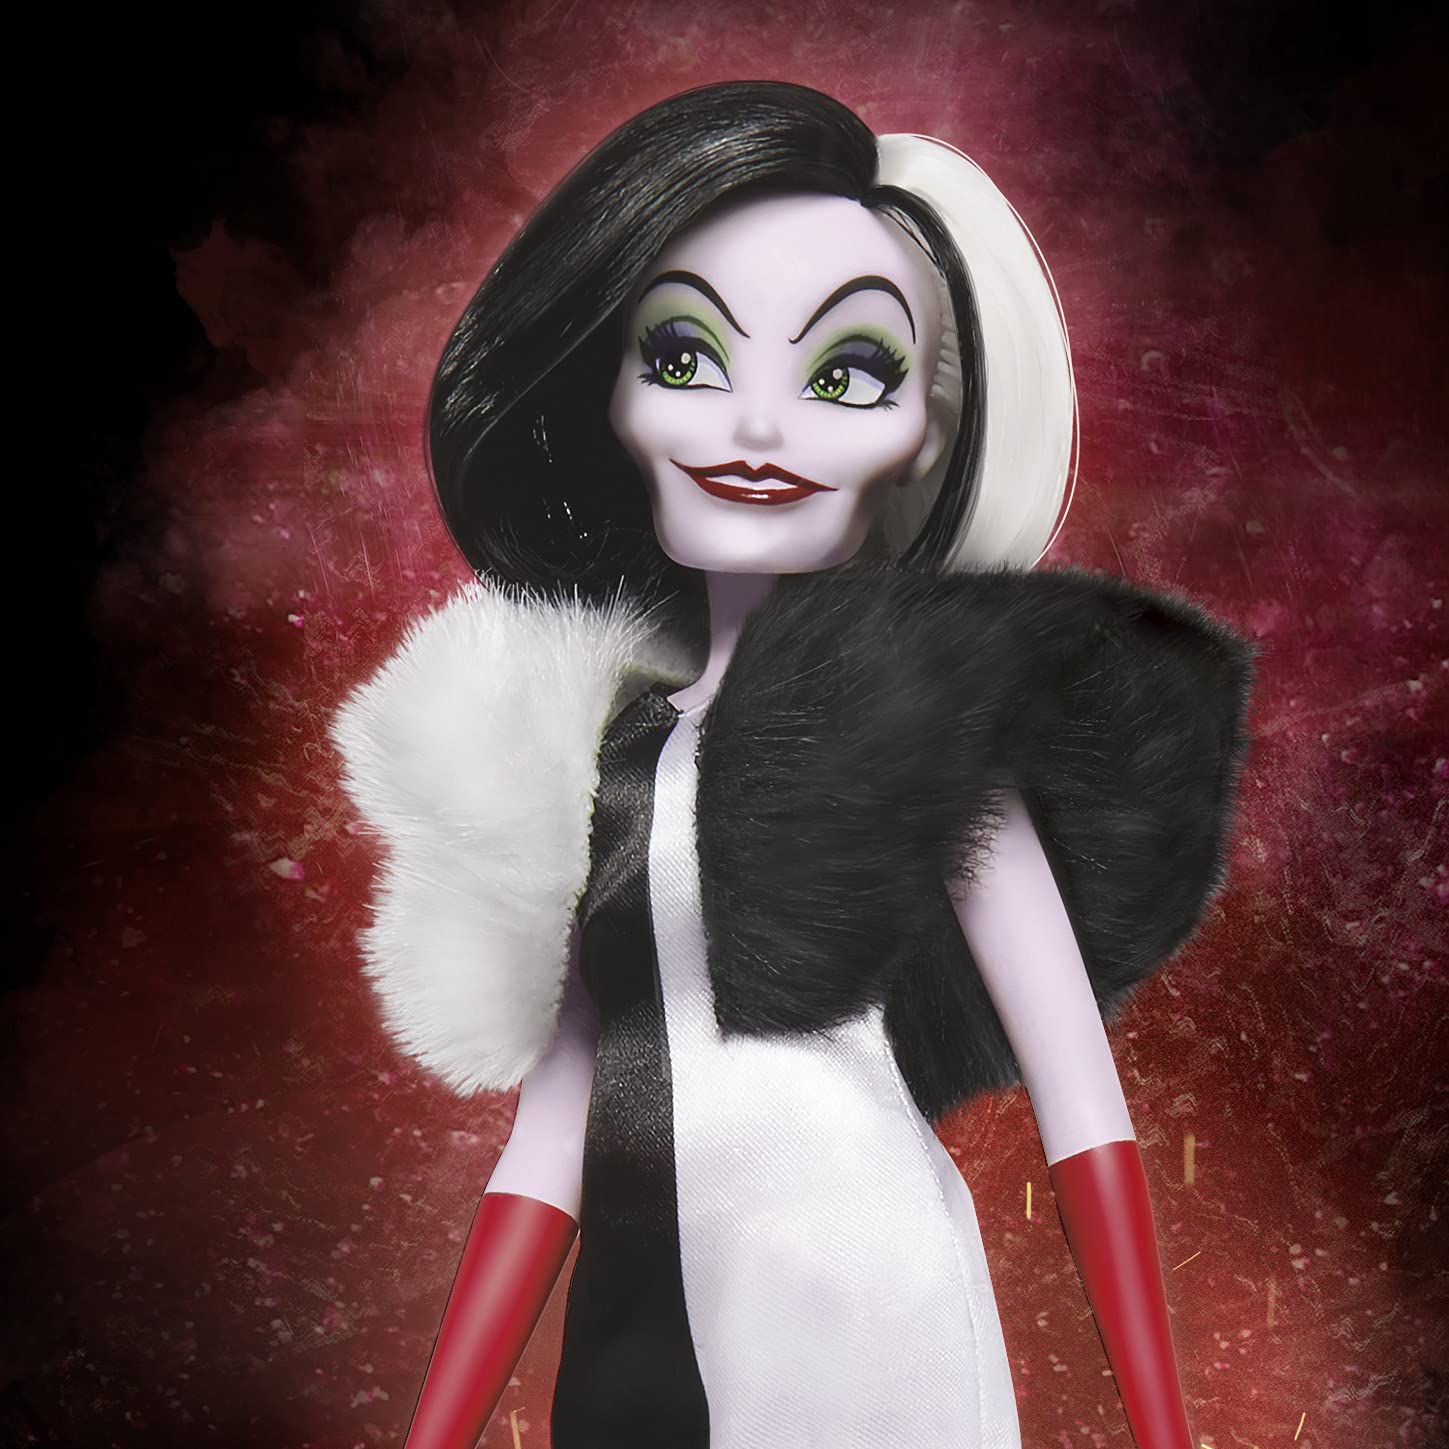 Disney Villains Cruella De Vil Fashion Doll, Accessories and Removable Clothes, Disney Villains Toy for Kids 5 Years Old and Up